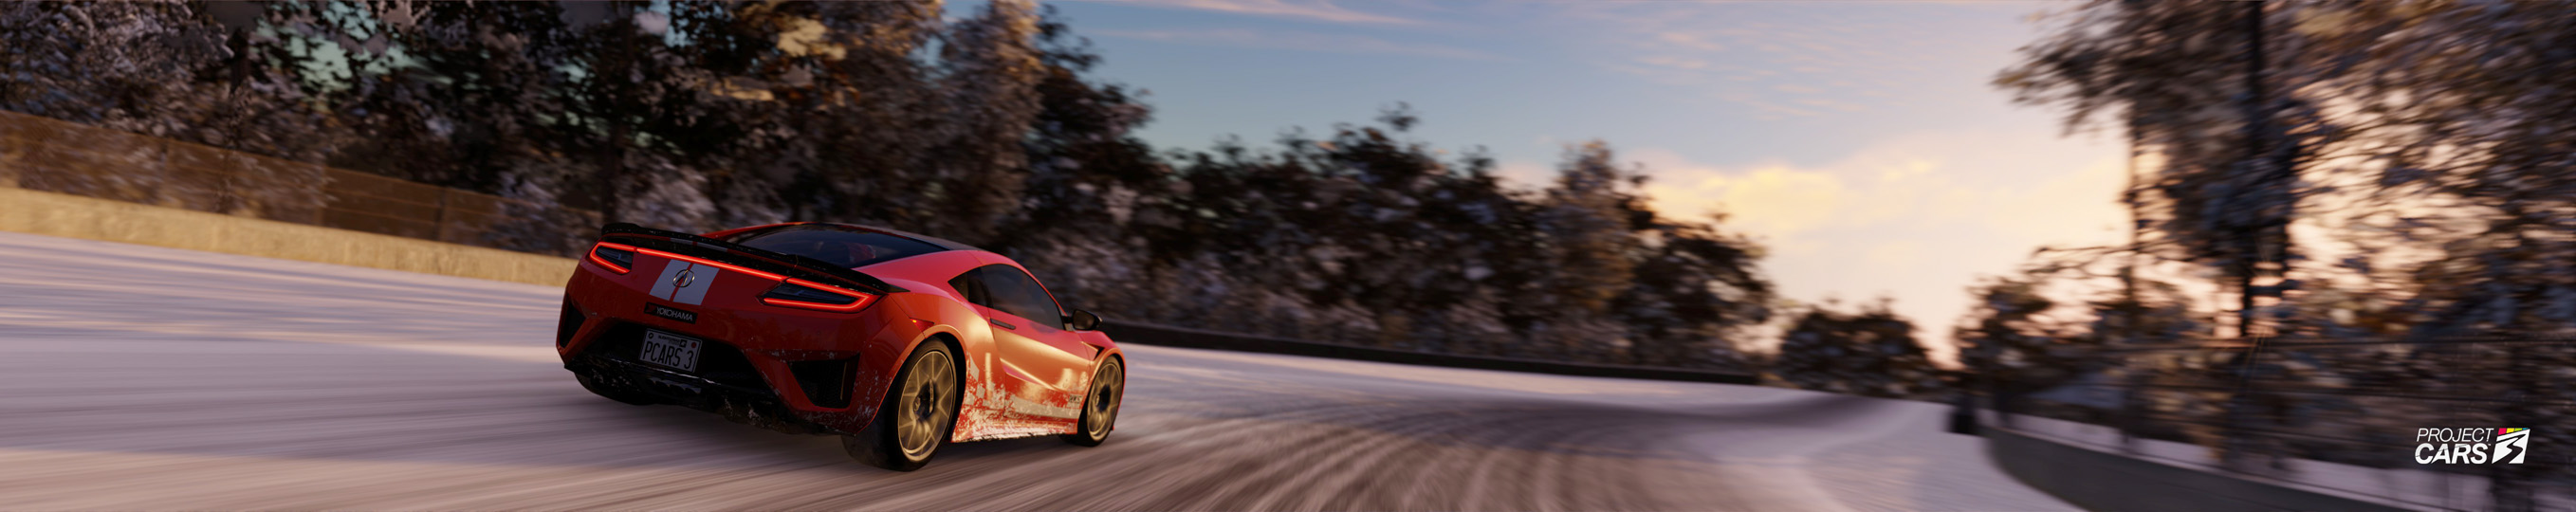 4 PROJECT CARS 3 ACURA NSX 2020 at ZOLDER Snow crop copy.jpg